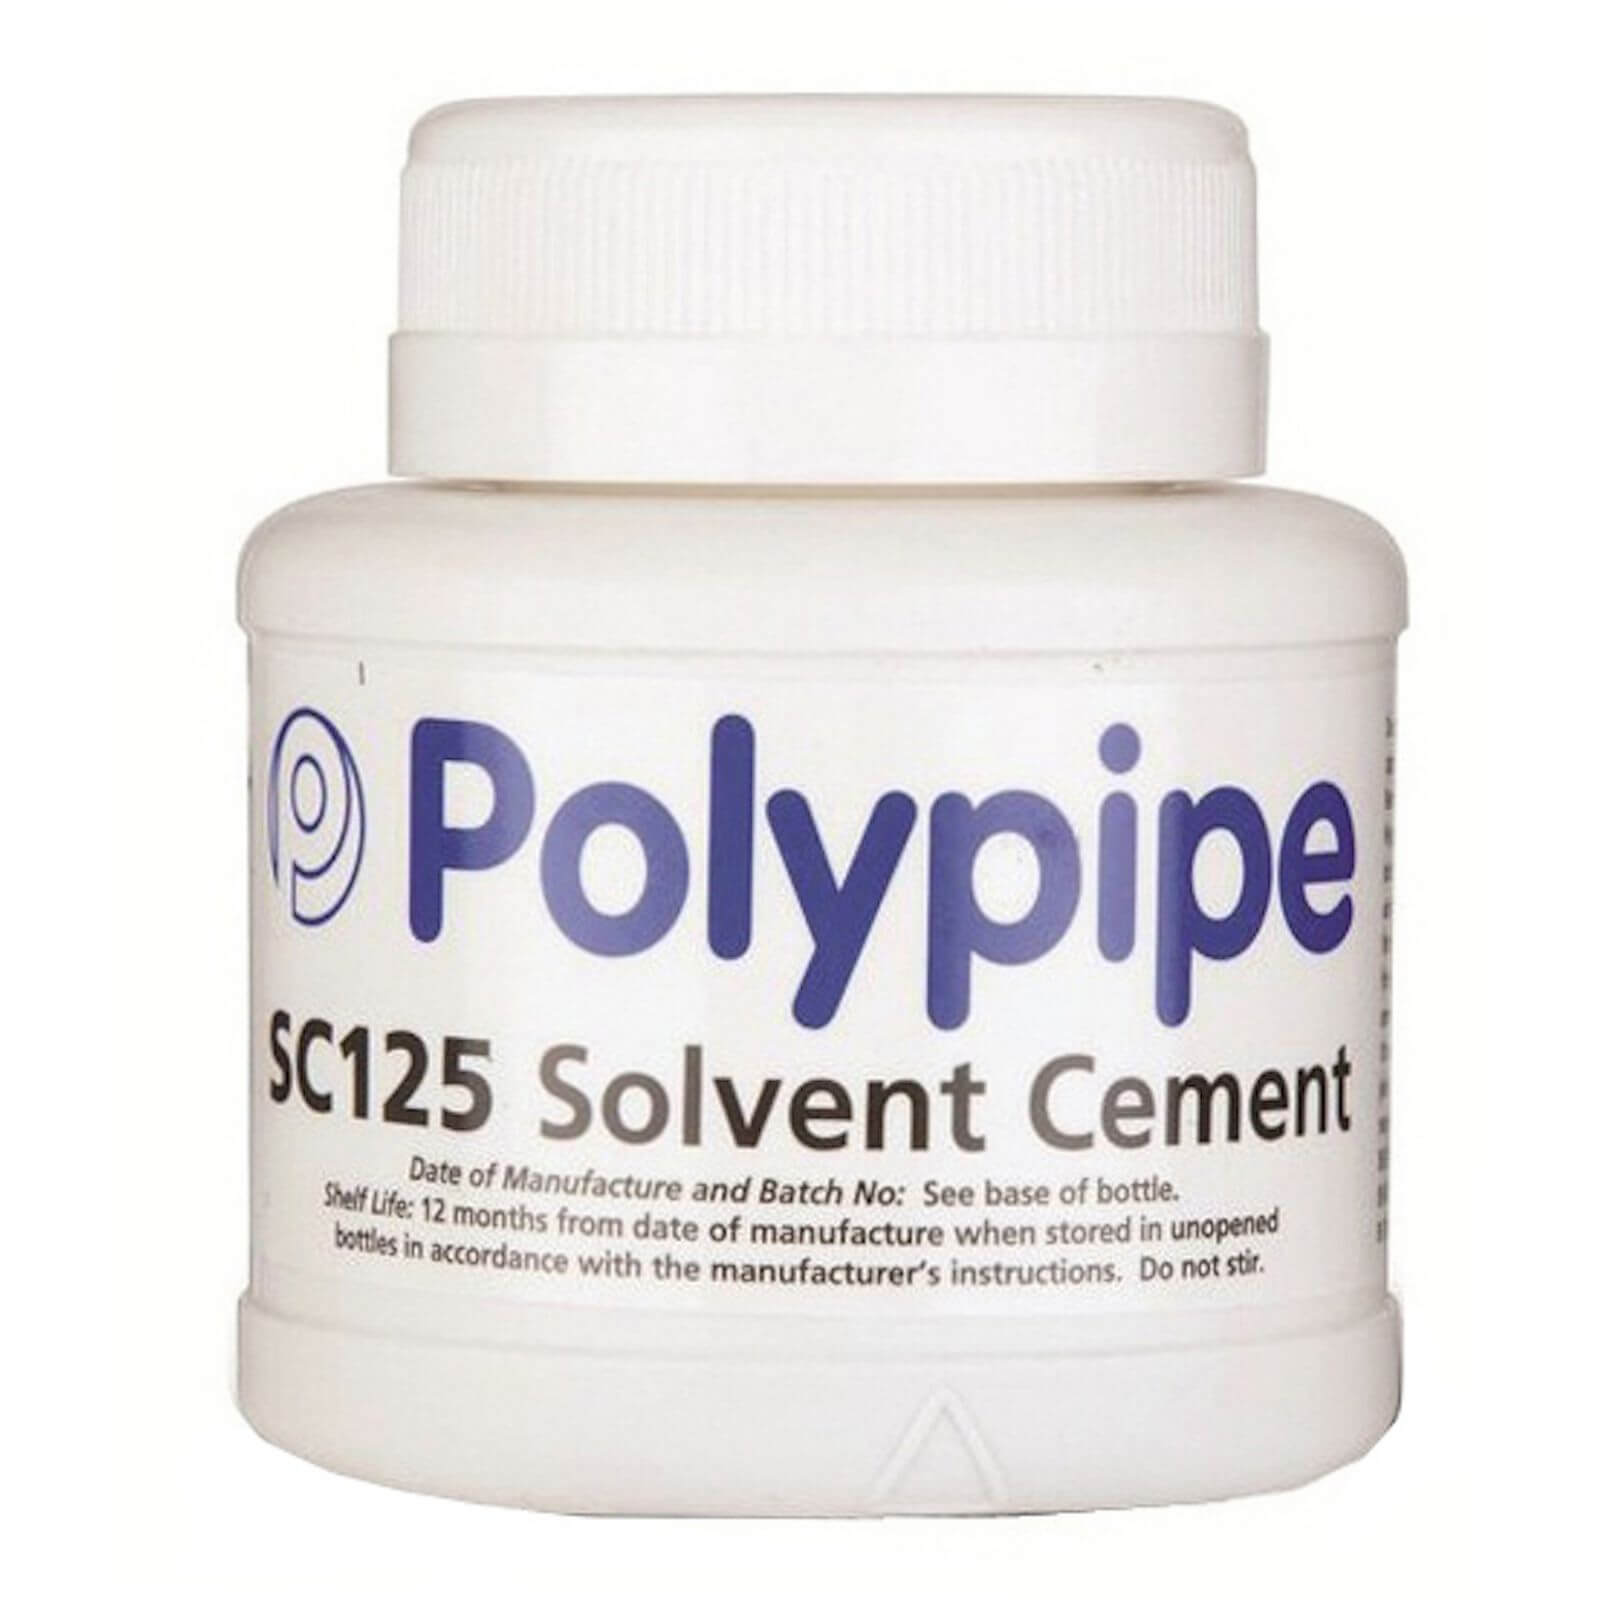 Polypipe Solvent Cement Tin & Brush - 125ml